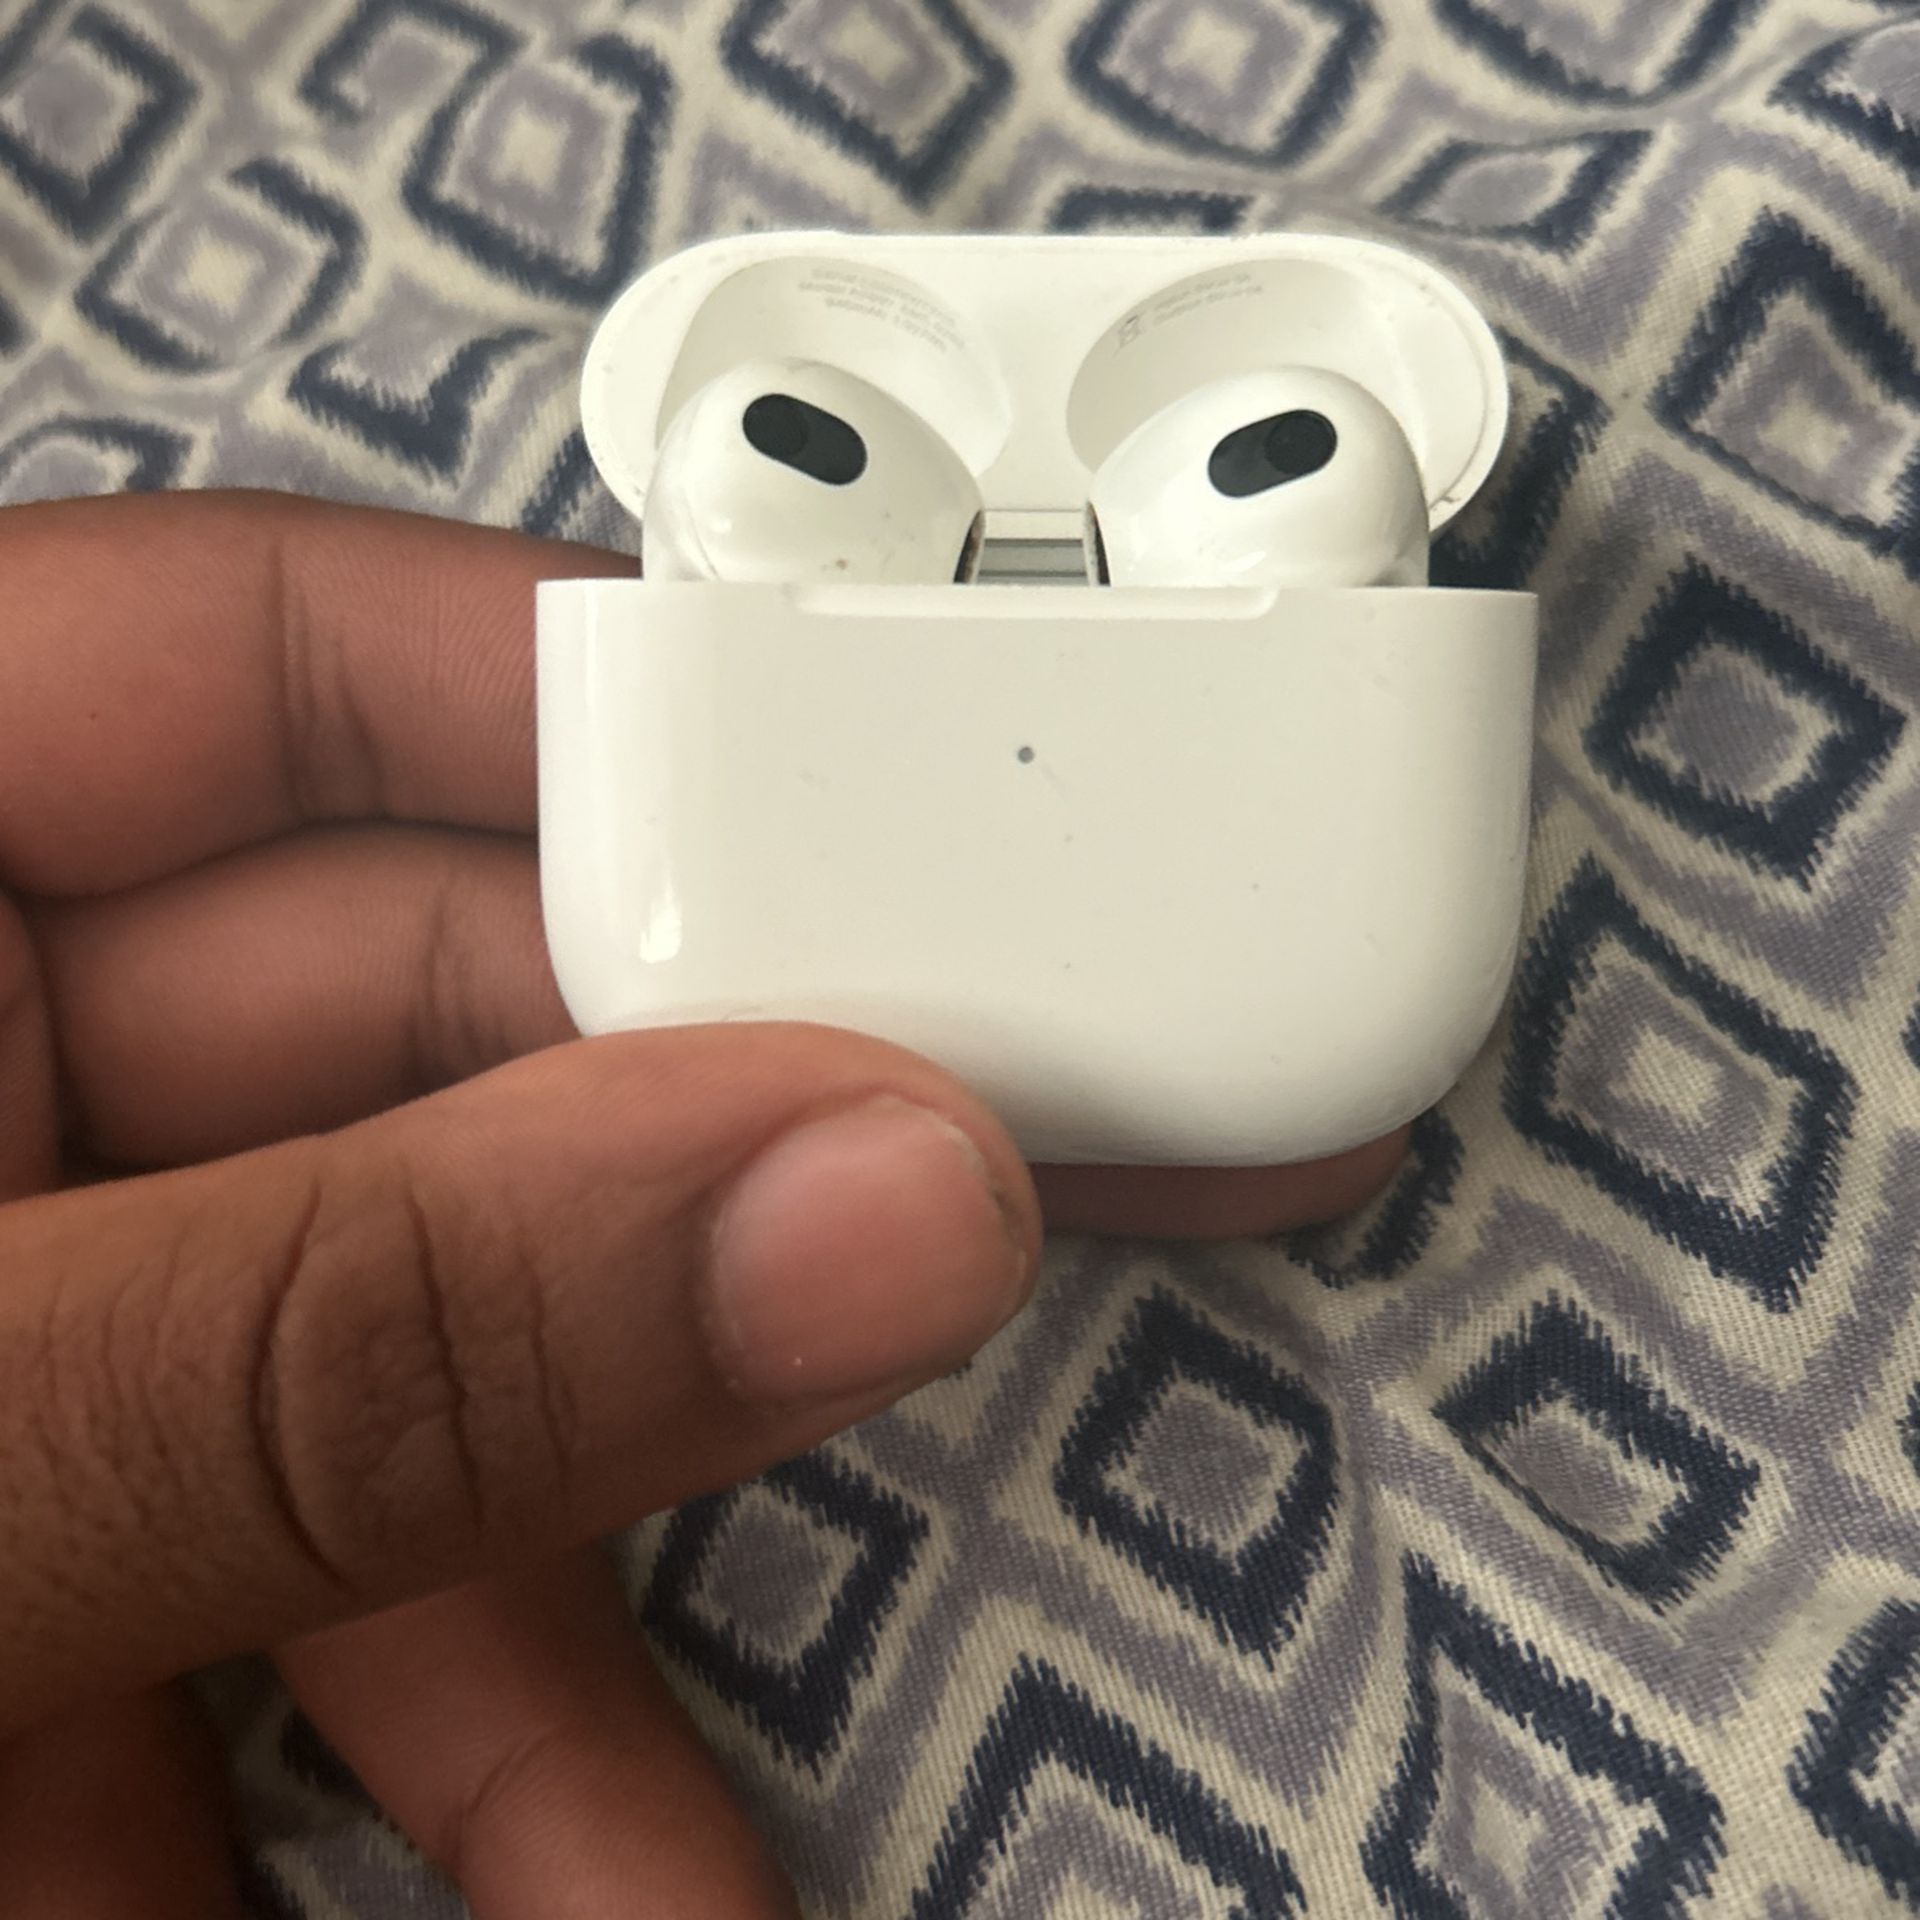 AirPods Gen Two